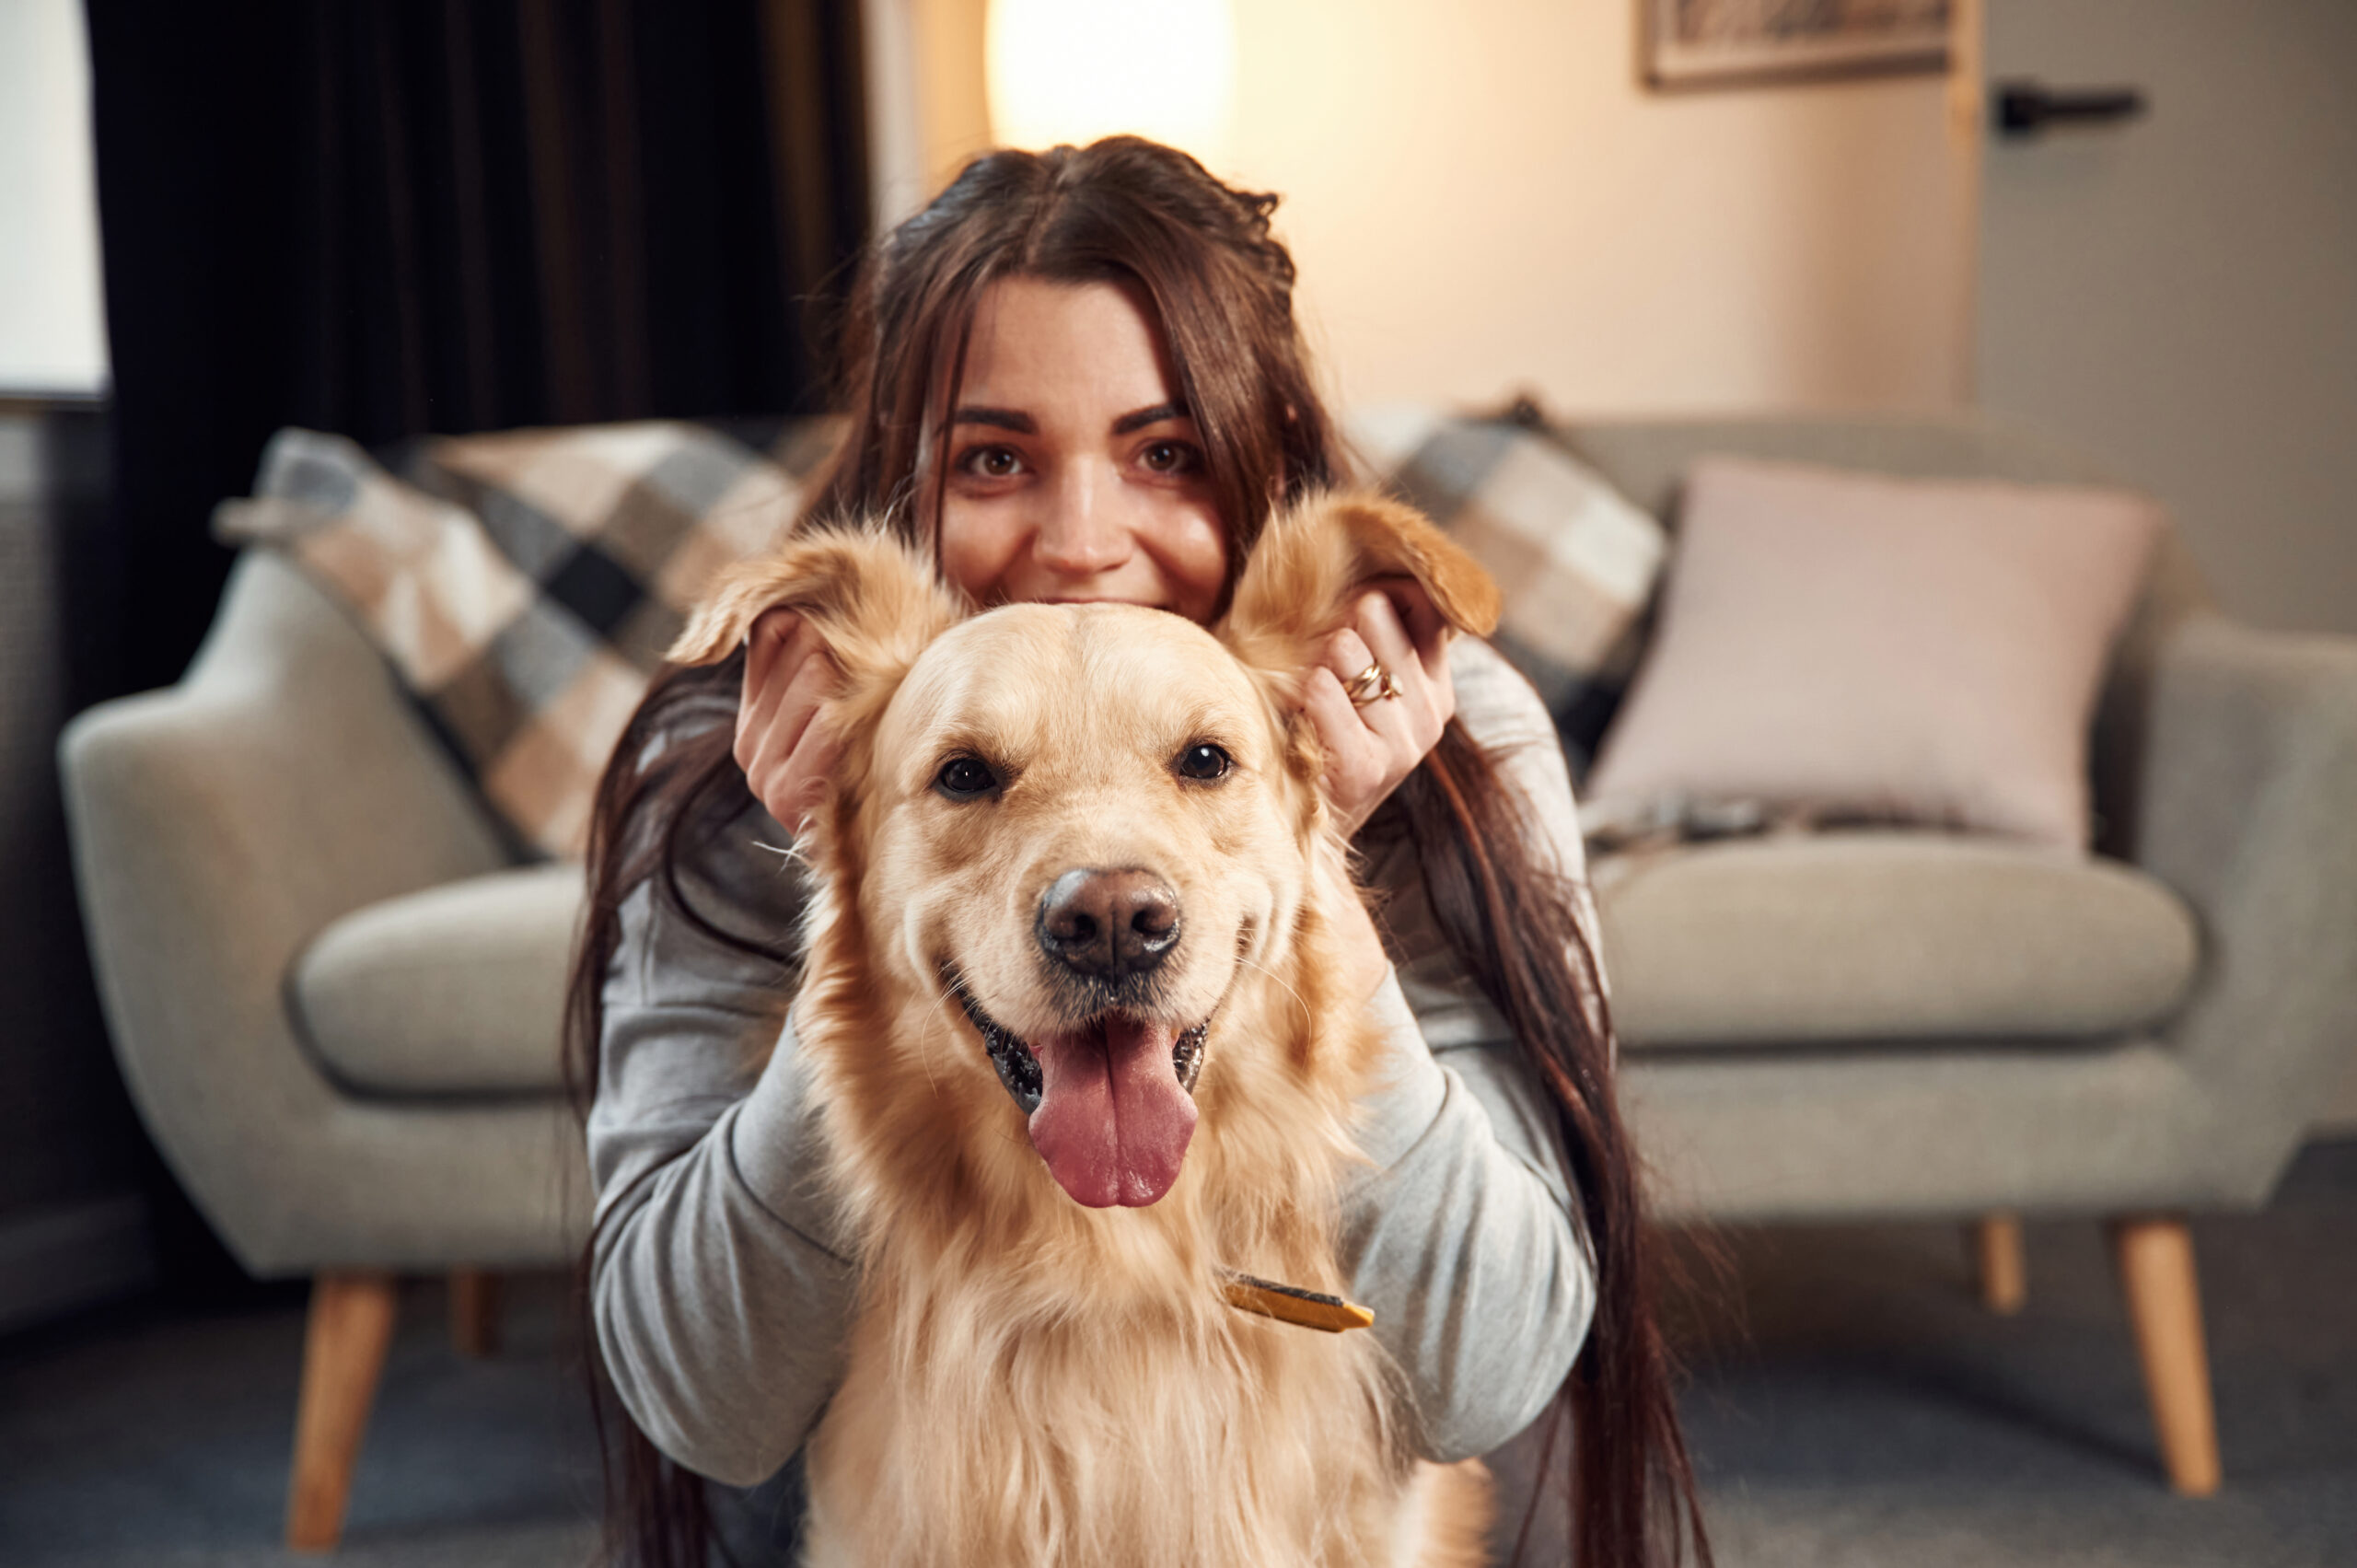 Playing with ears, front view, portrait. Woman is with golden retriever dog at home